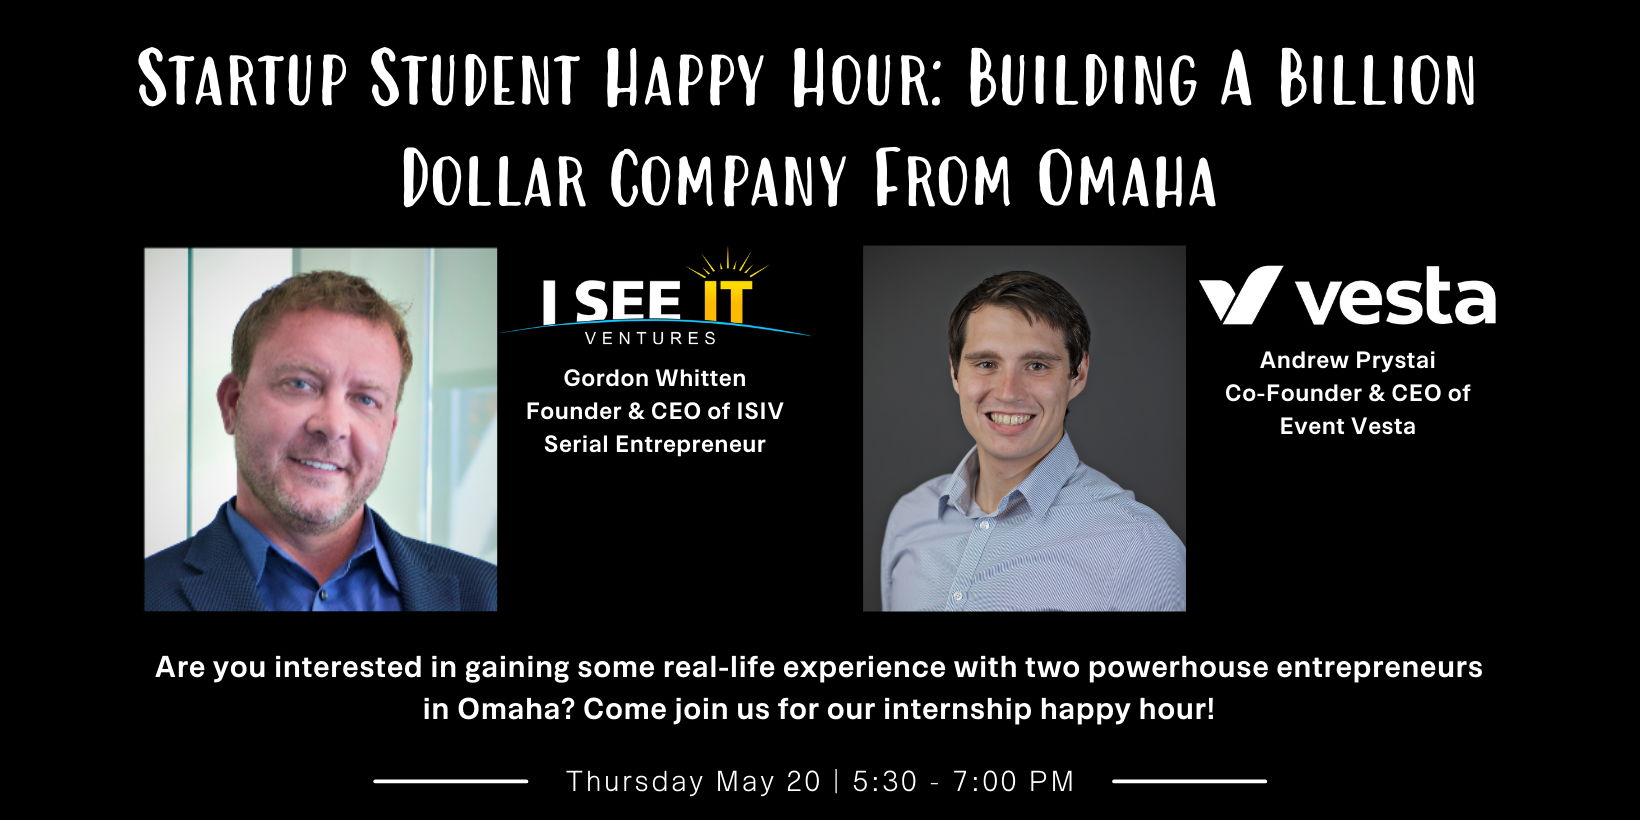 Startup Student Happy Hour: Building A Billion Dollar Company From Omaha promotional image